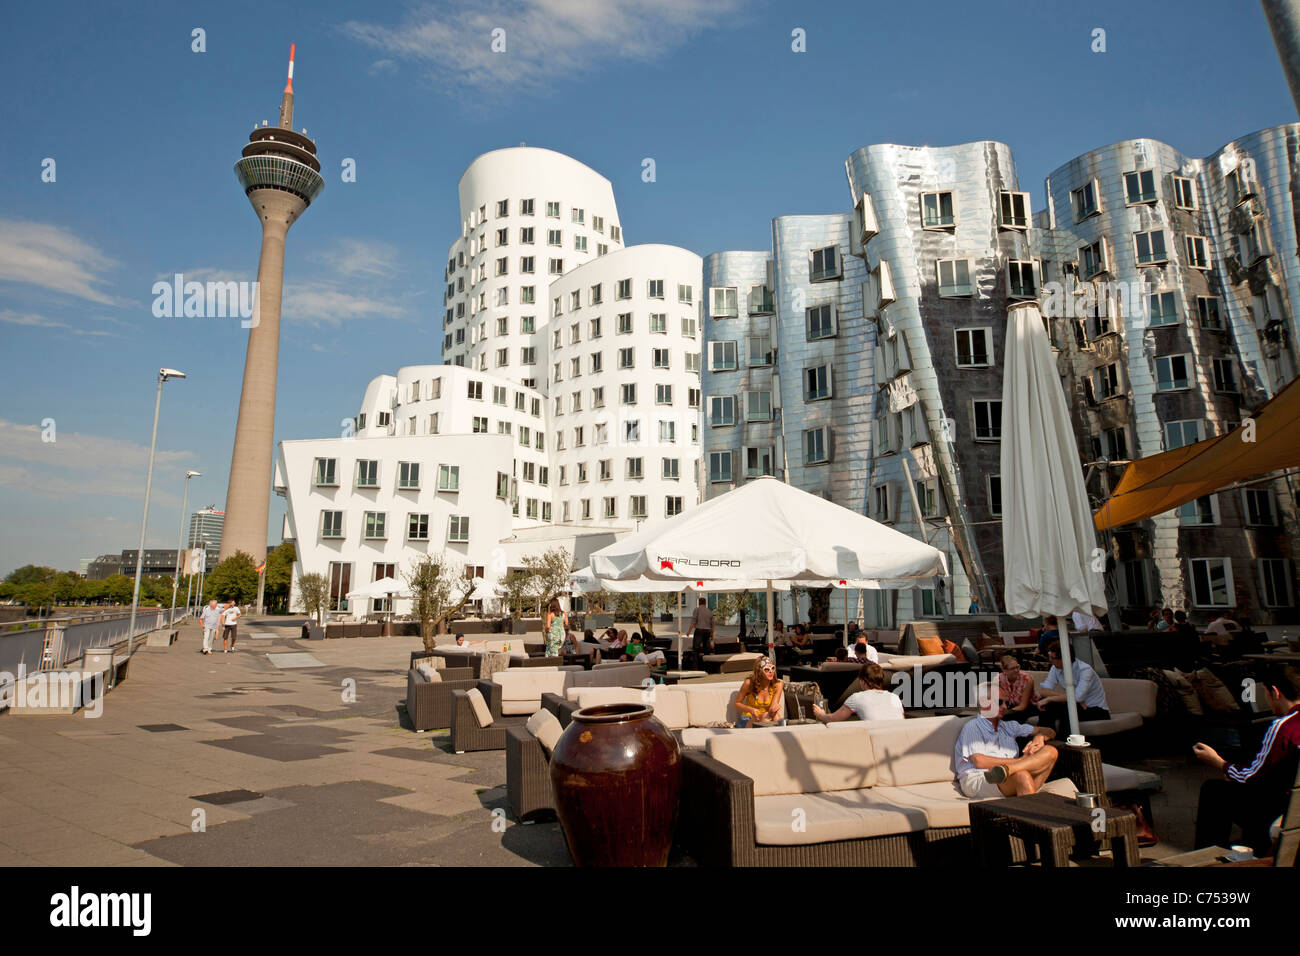 The Neue Zollhof  designed by  architect Frank O. Gehry of Media Harbor and Rheinturm telecommunications tower in Duesseldorf, Stock Photo